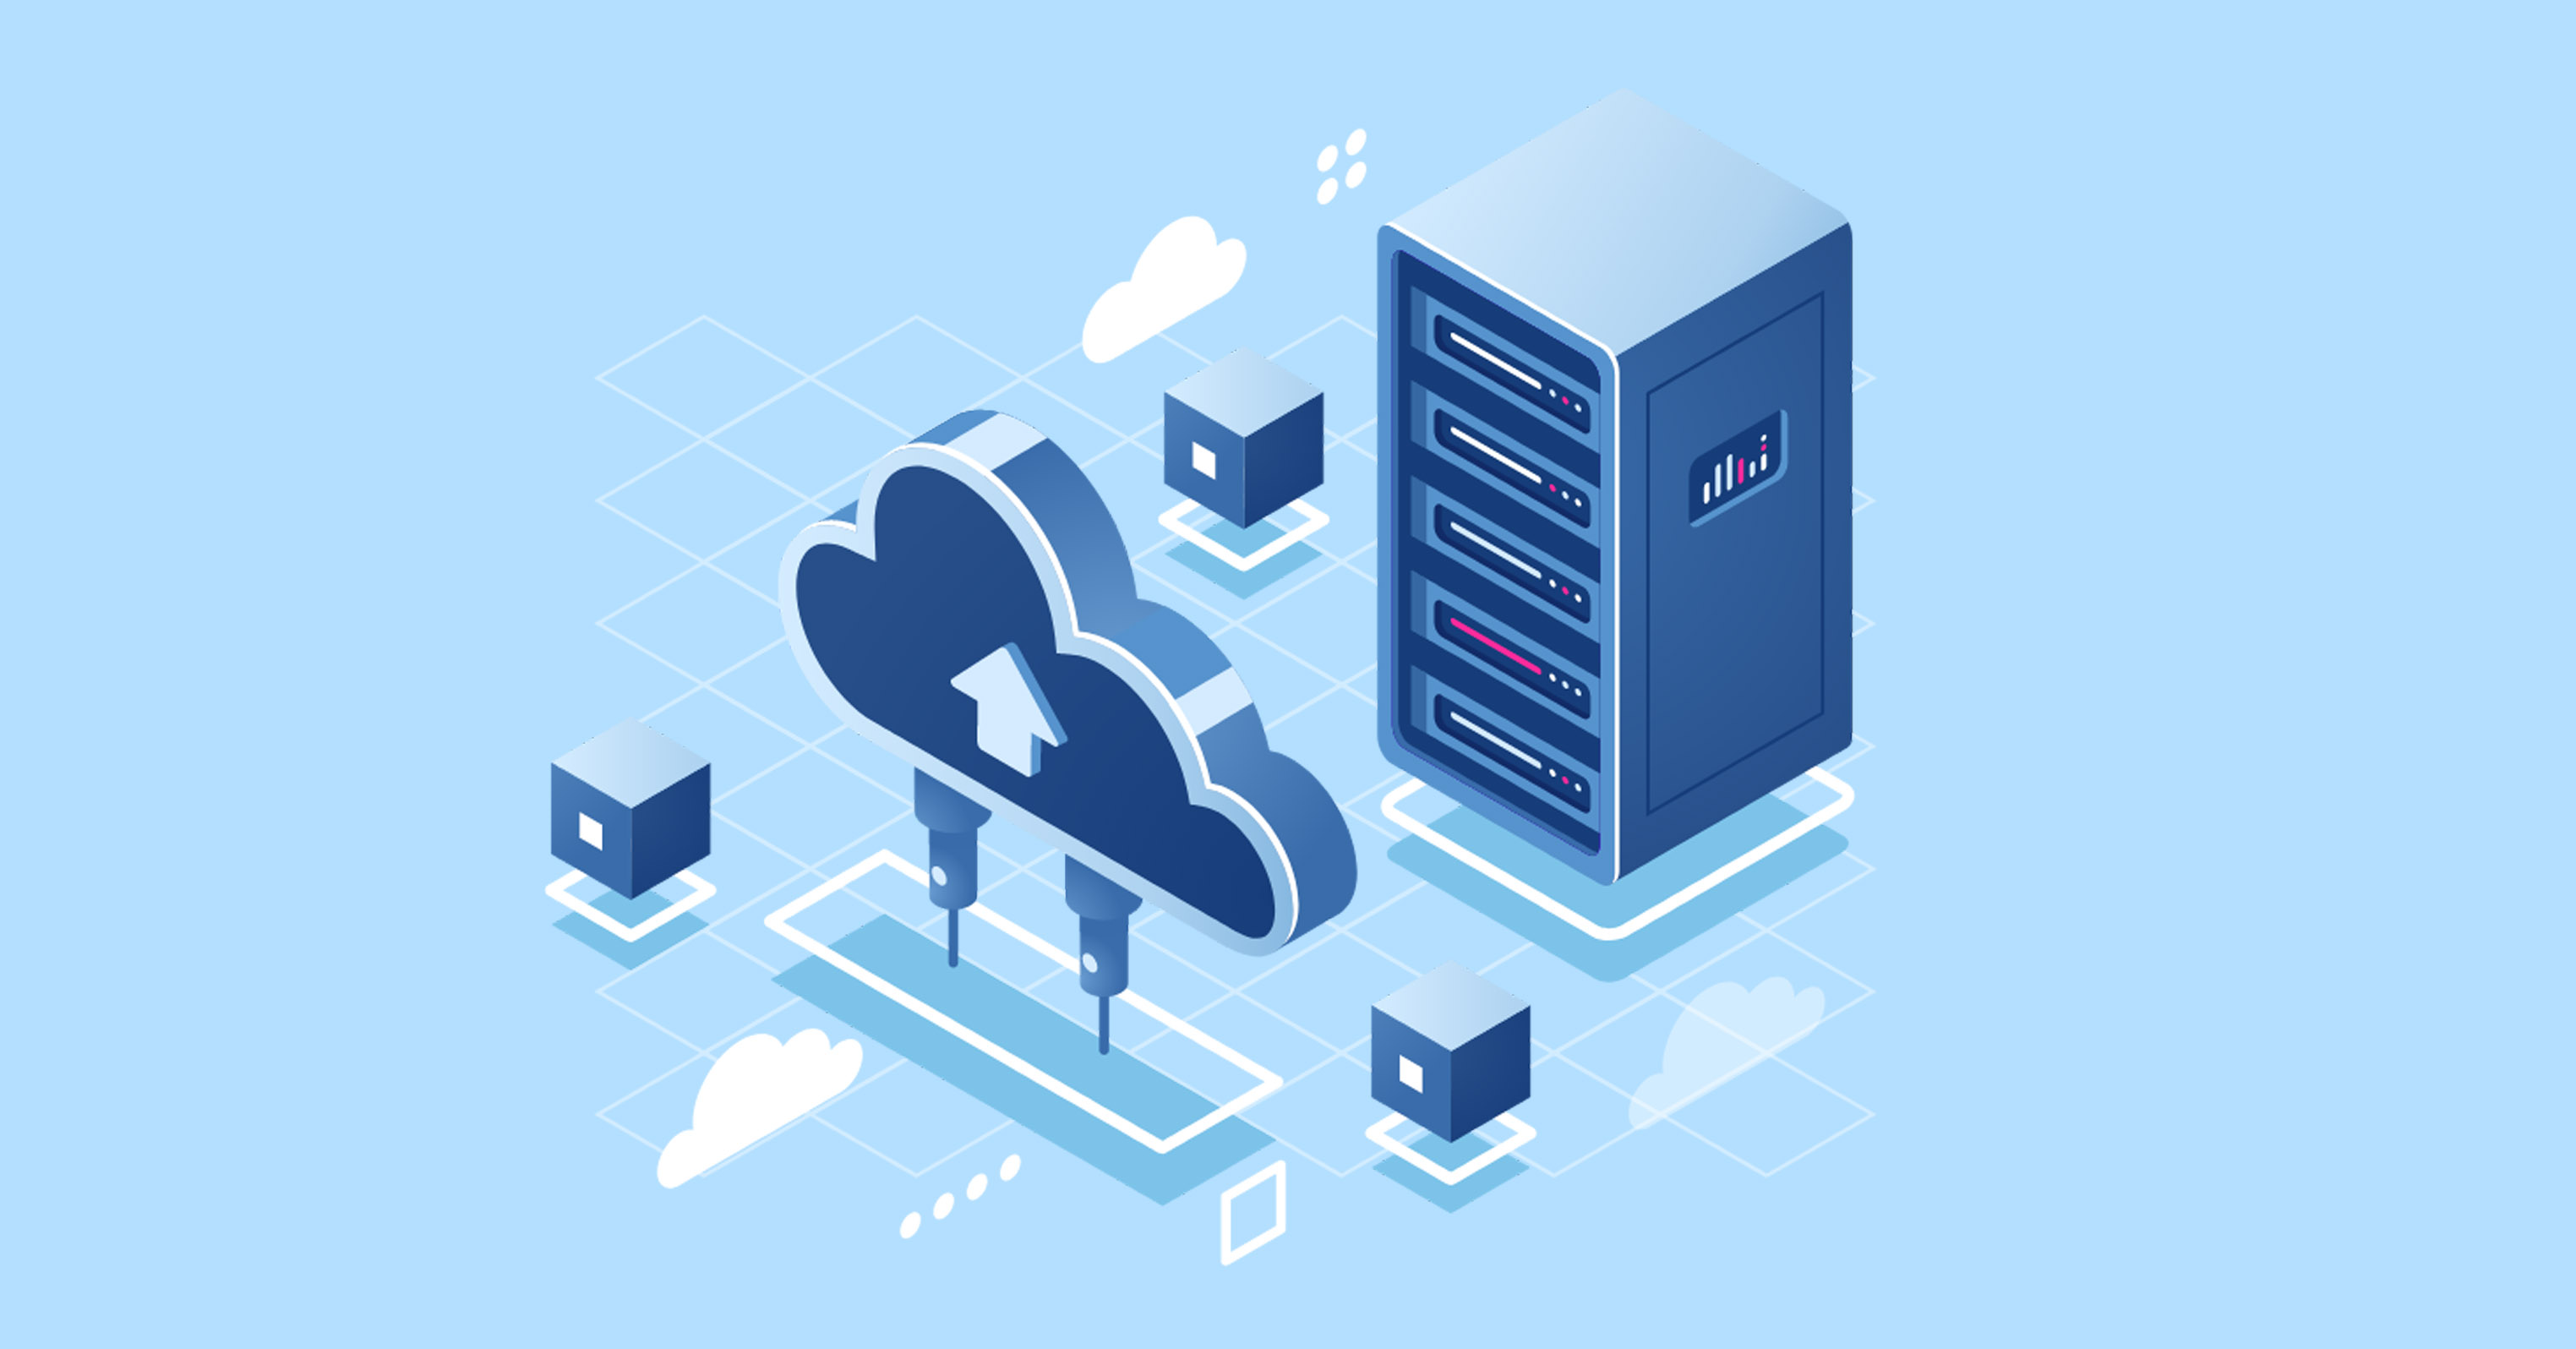 A Complete Review for Managed DigitalOcean Cloud Hosting